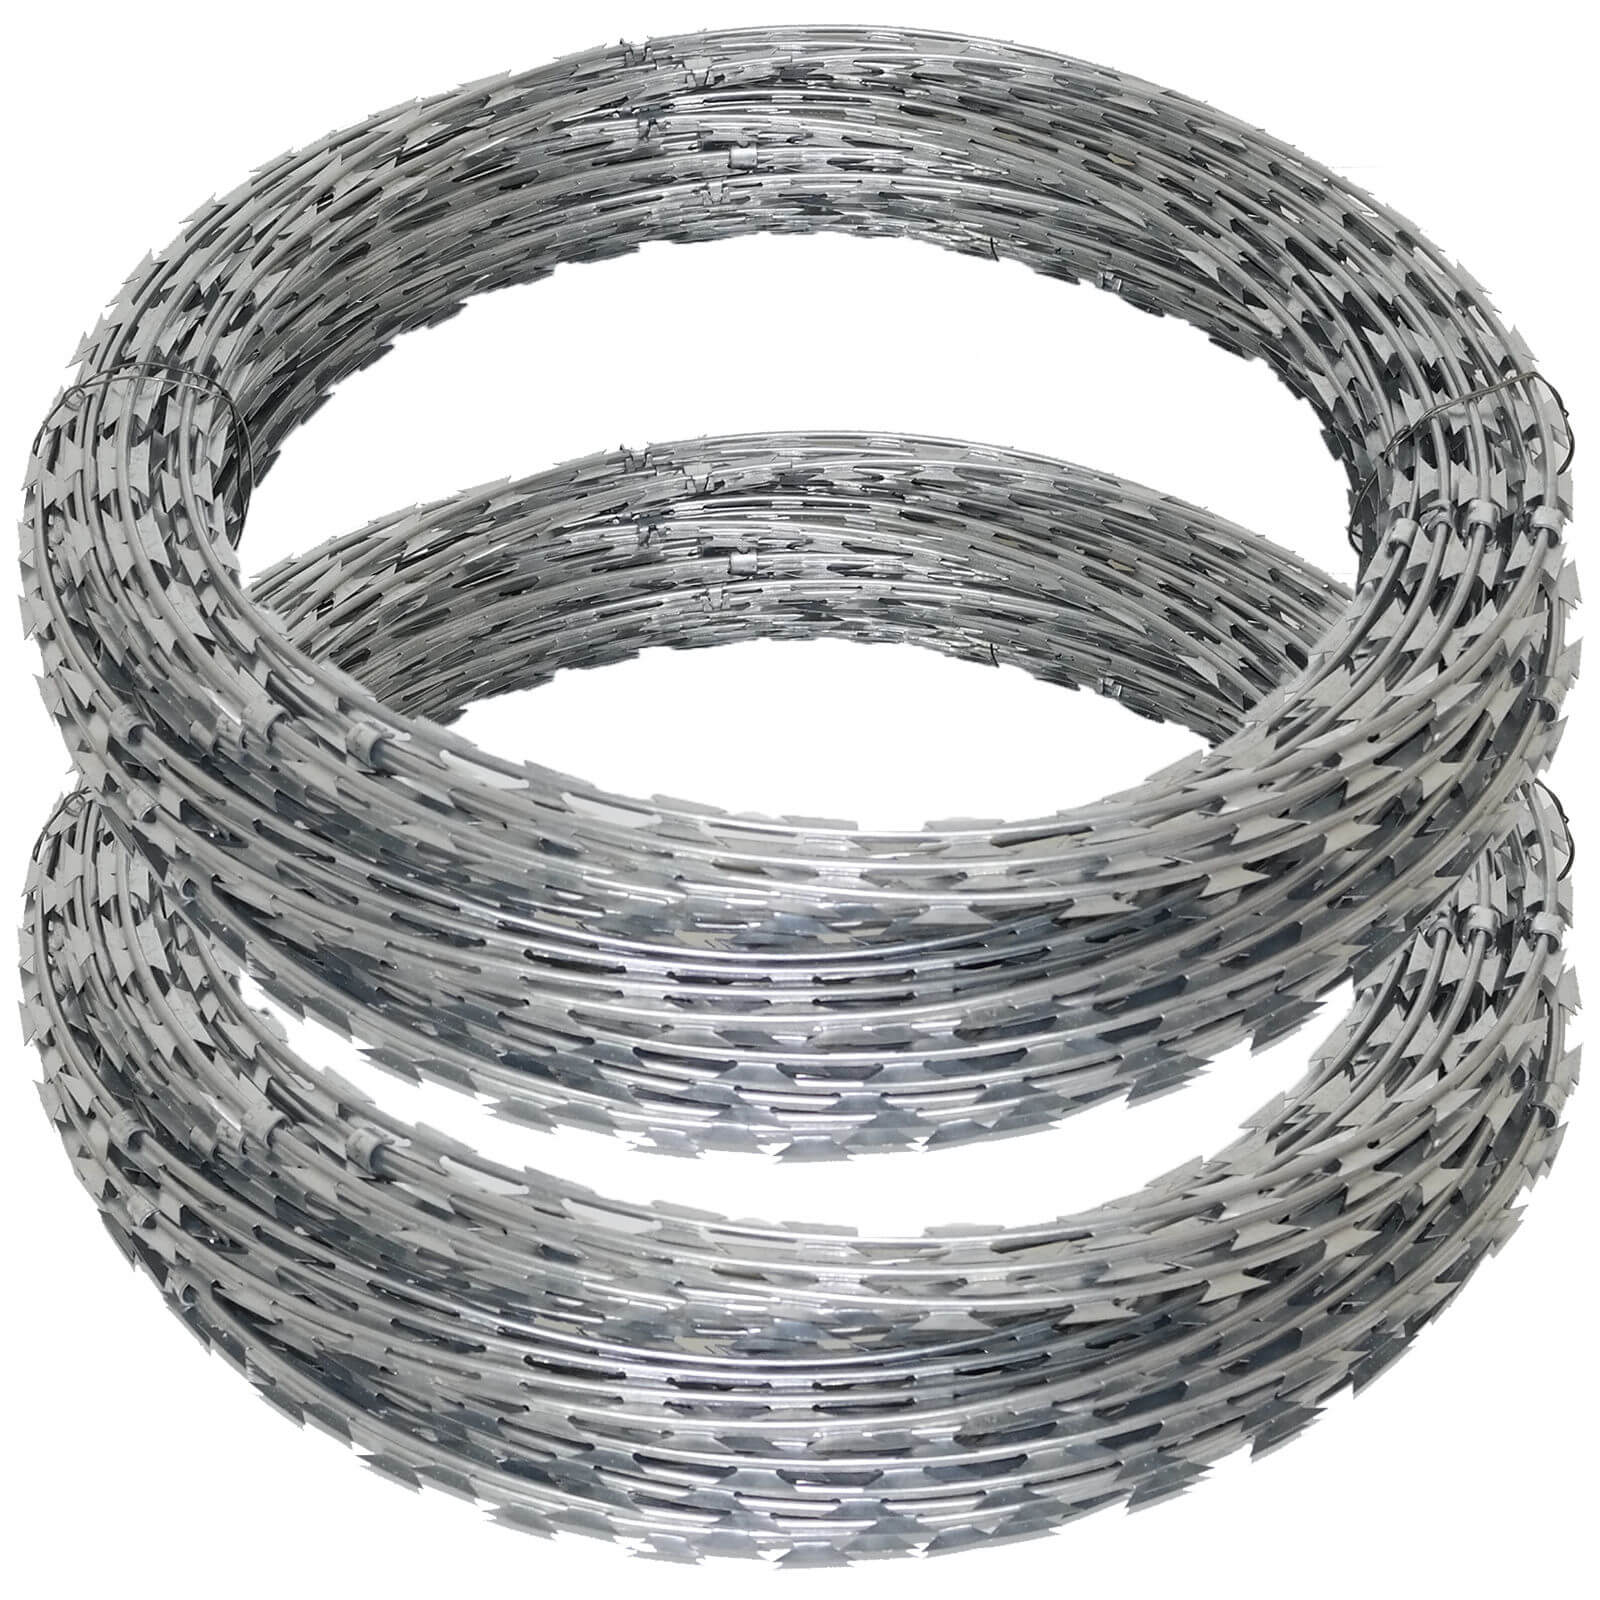 Welcome to the world of razor wire fencing: your security is our priority